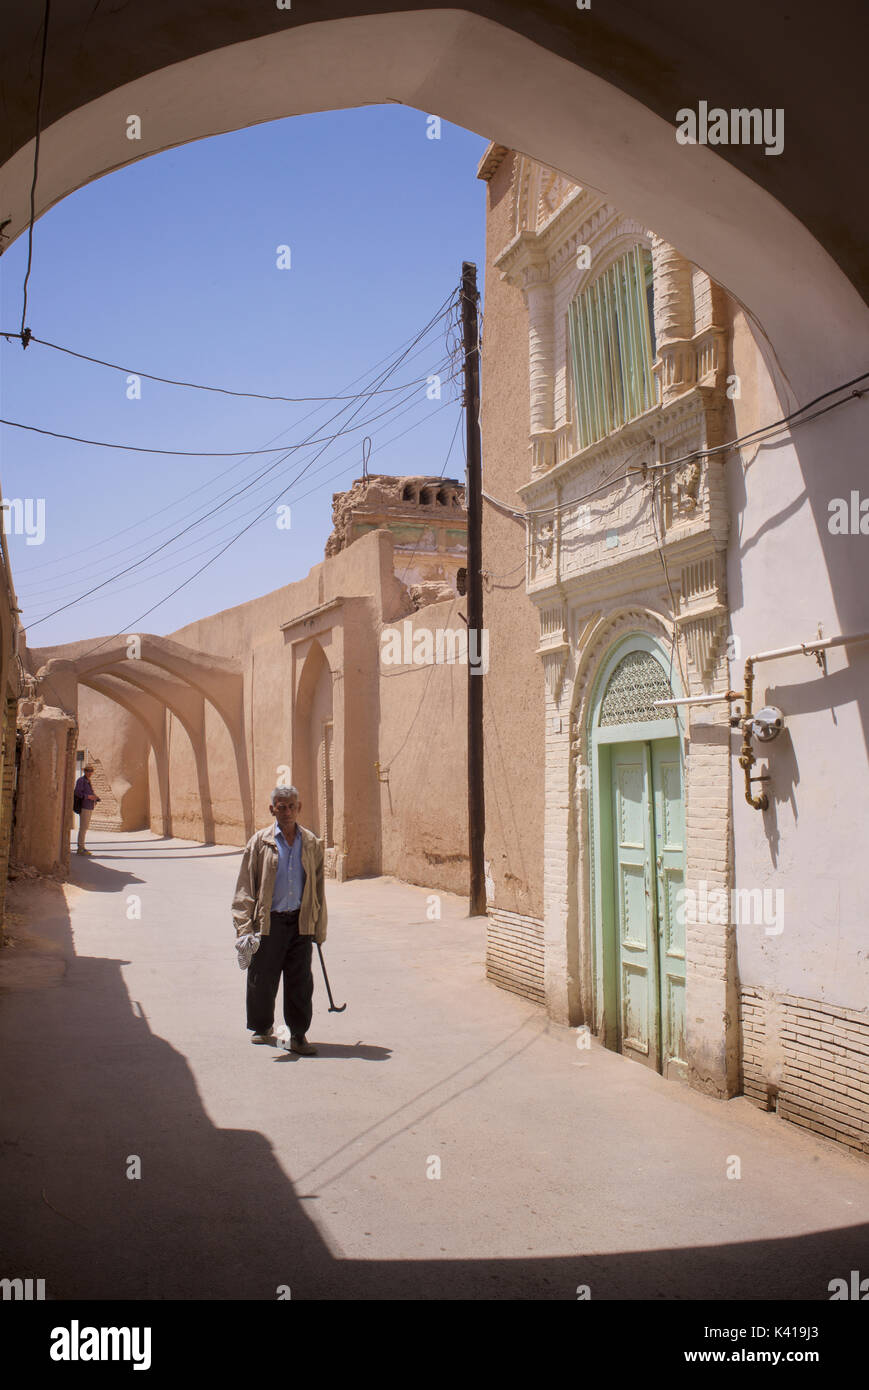 Iranian man stops for a chat in the old streets of Yazd, Iran Stock Photo